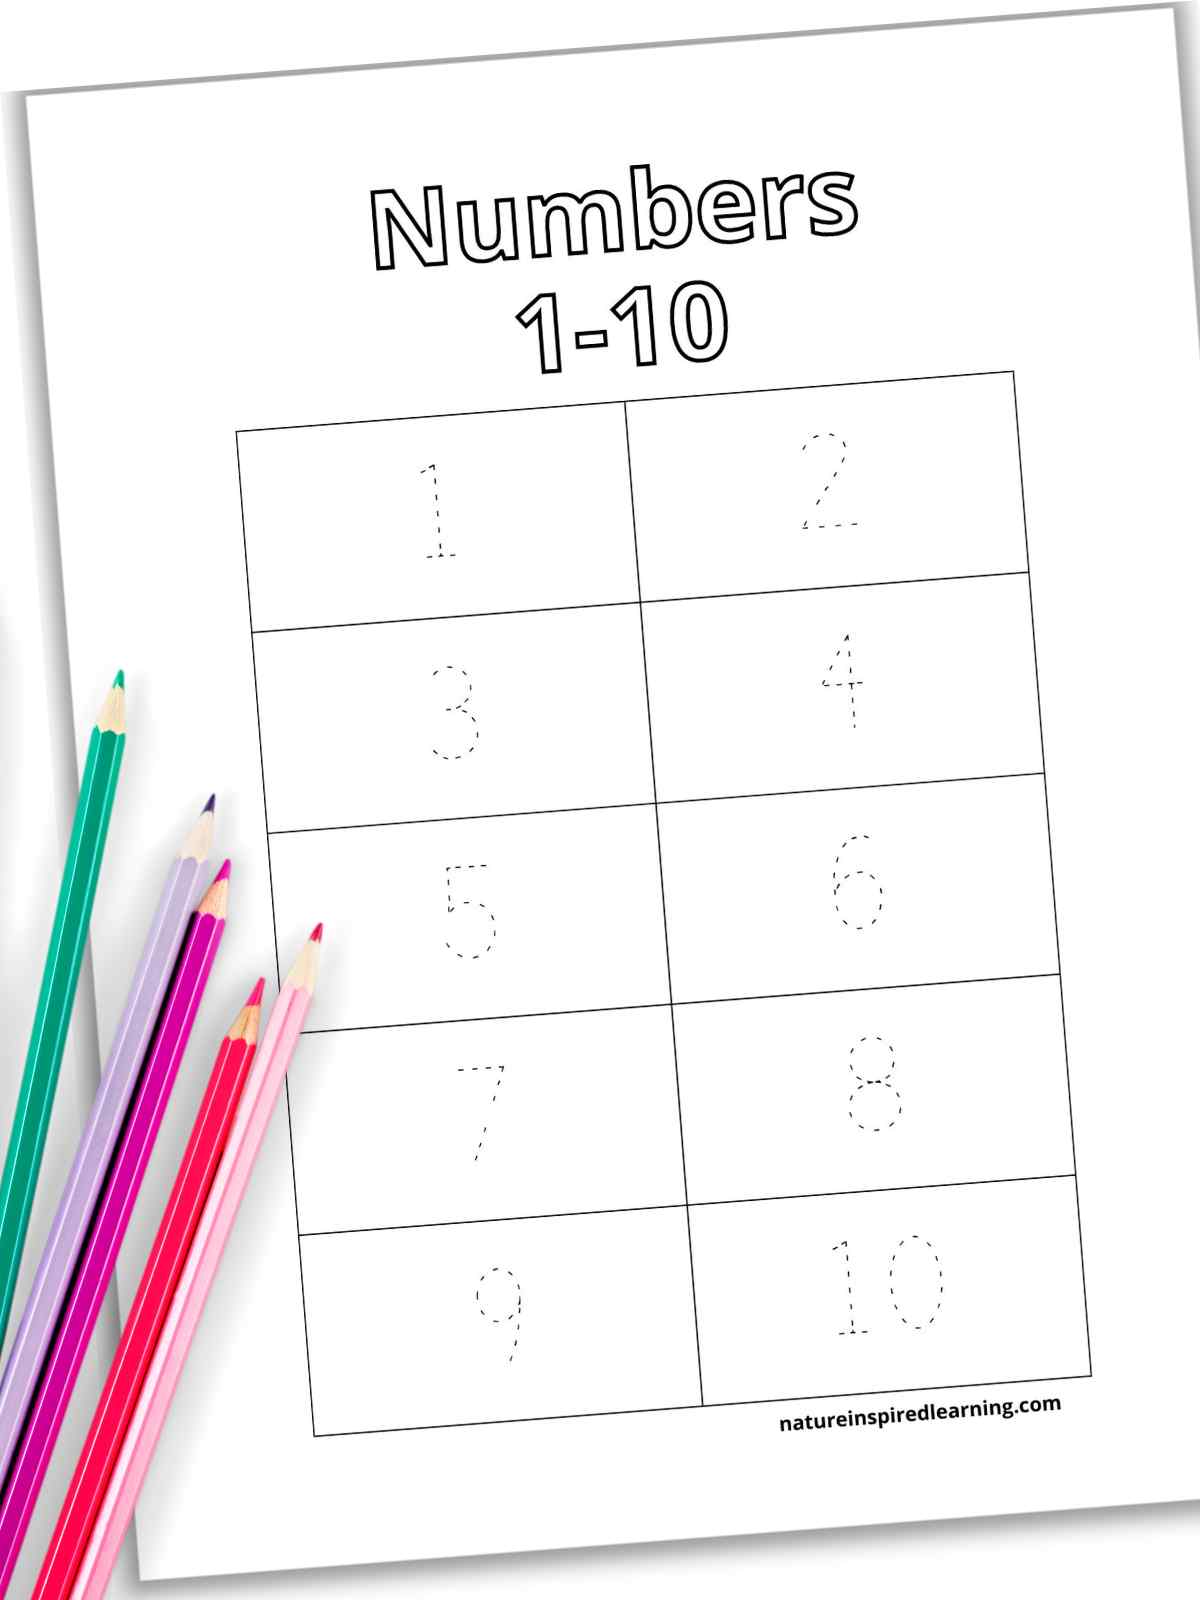 black and white worksheet with a chart with traceable numbers 1-10 with one number within each rectangle. Colored pencils on top of the printable bottom left corner.